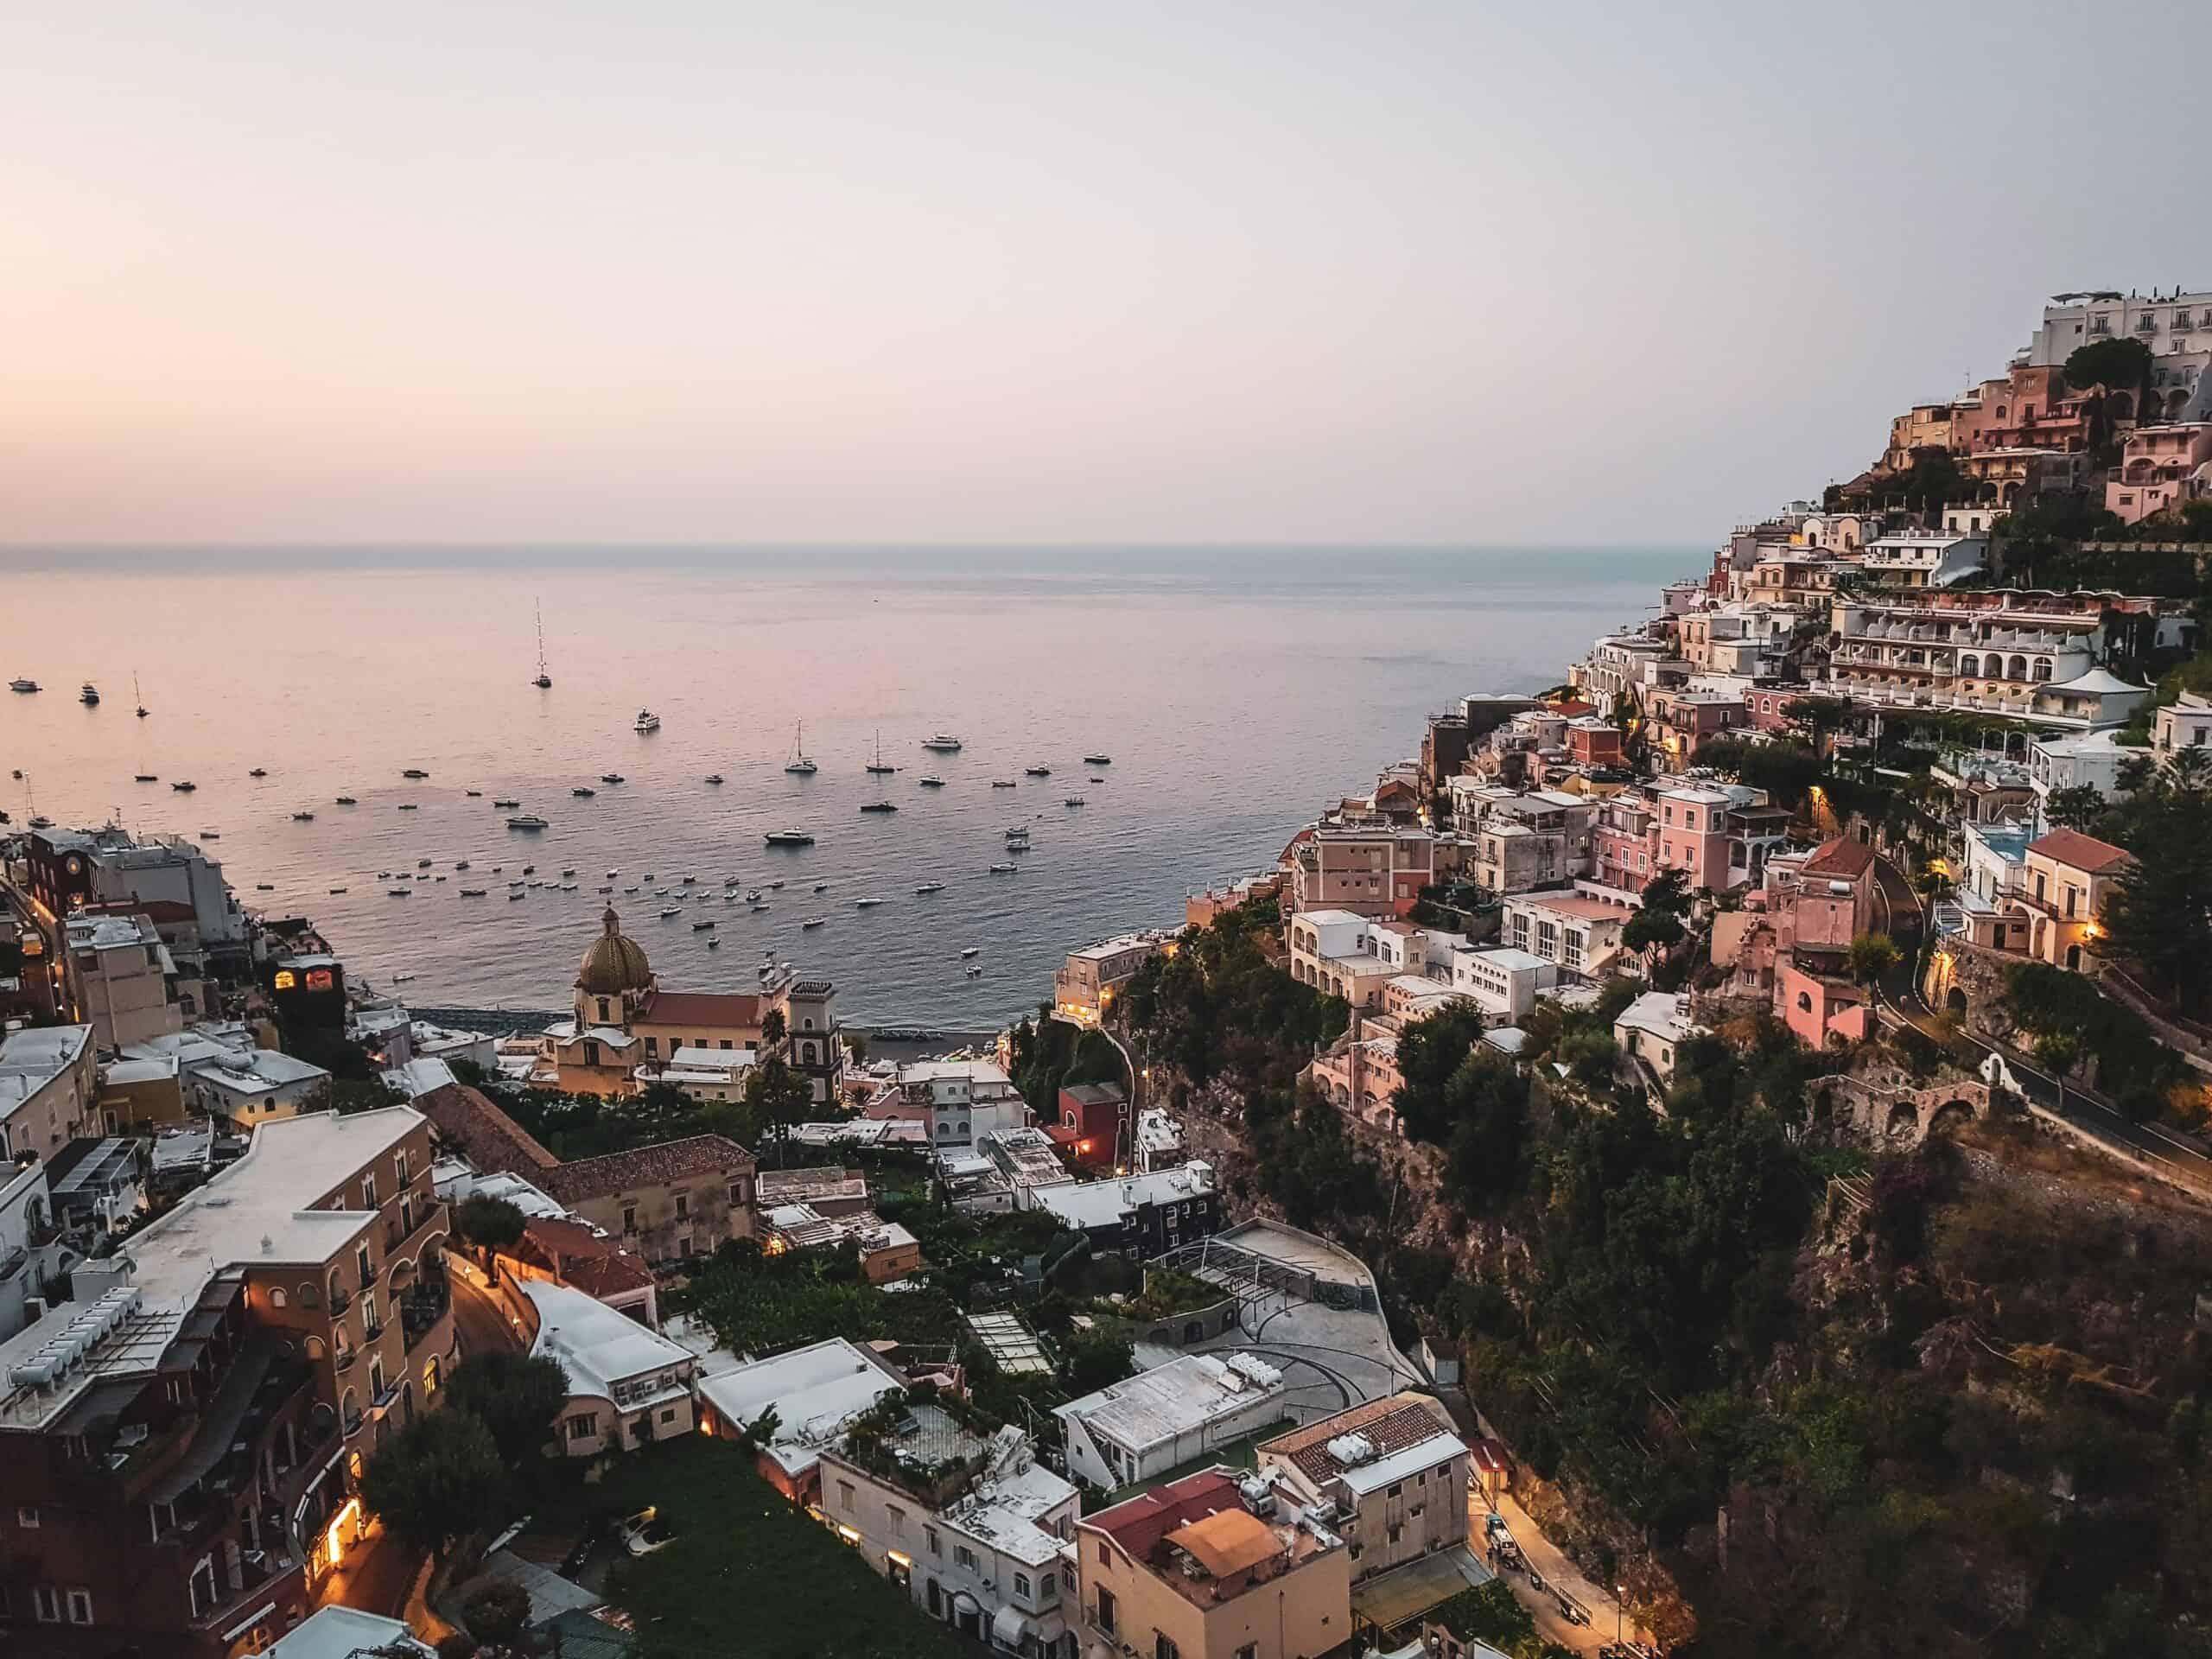 https://undiscoveredpathhome.com/wp-content/uploads/2023/06/Things-to-do-in-Positano-Viewpoint-scaled.jpeg